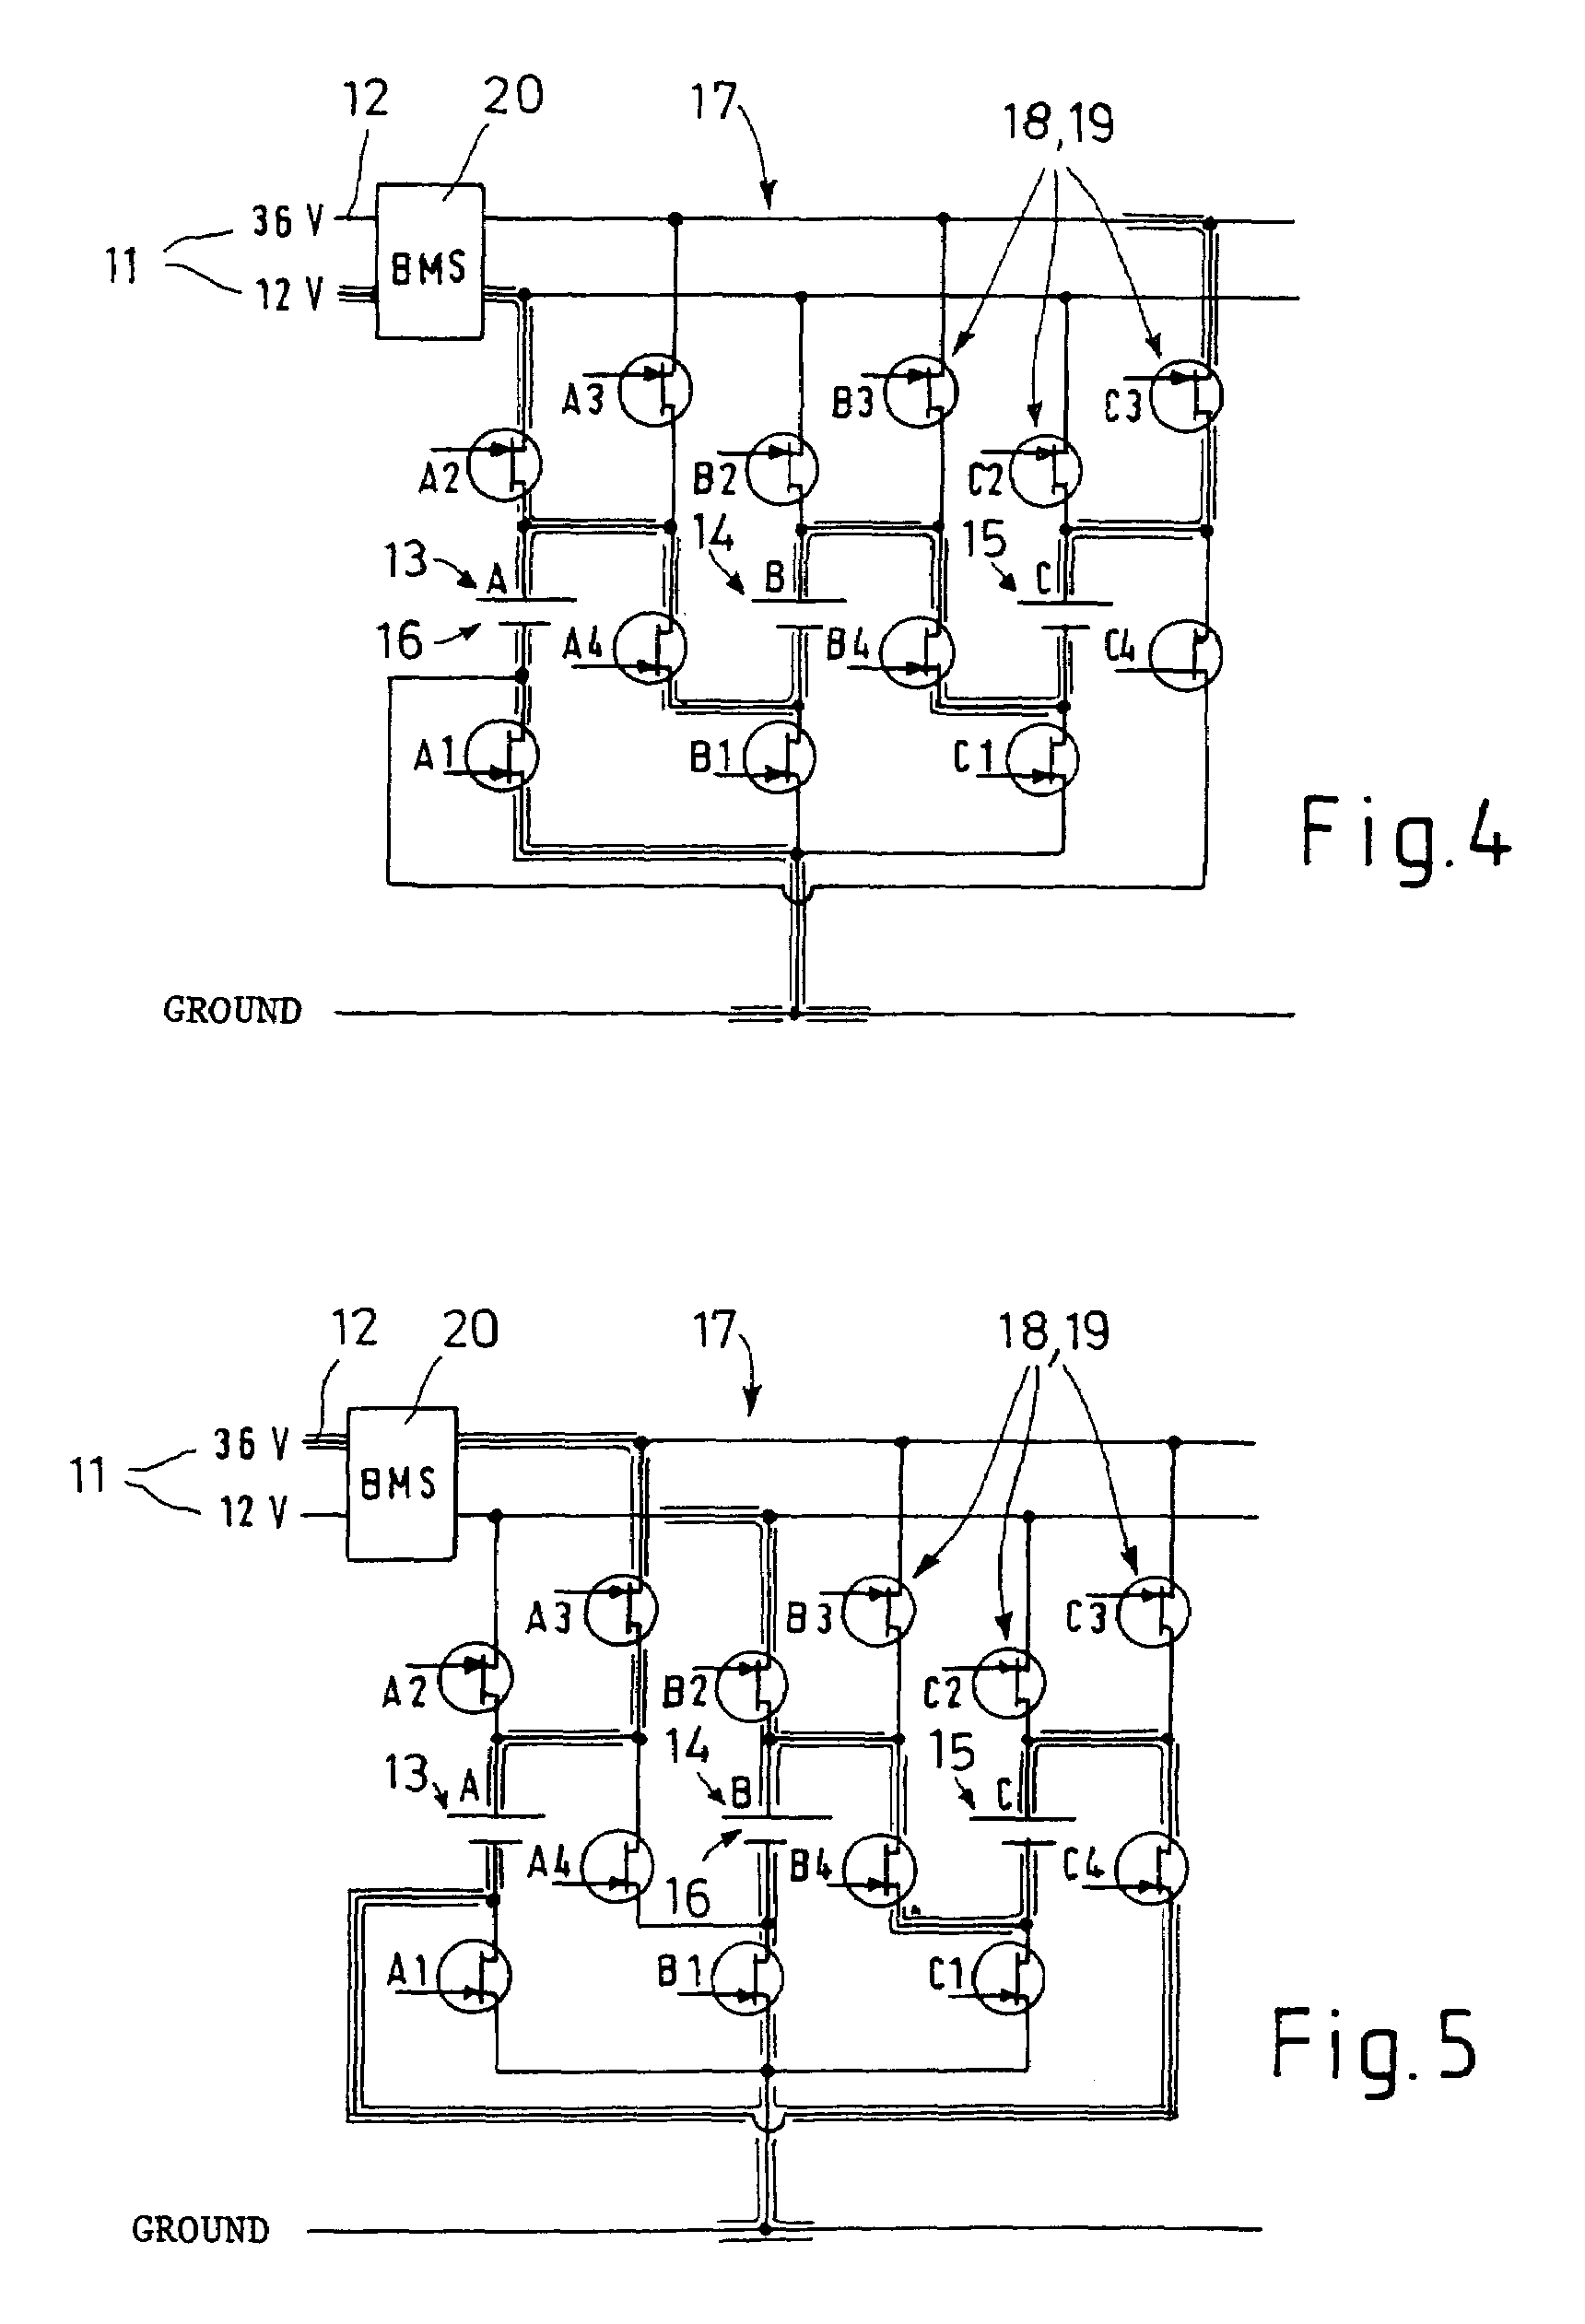 Multi-voltage power supply system and method for operating same